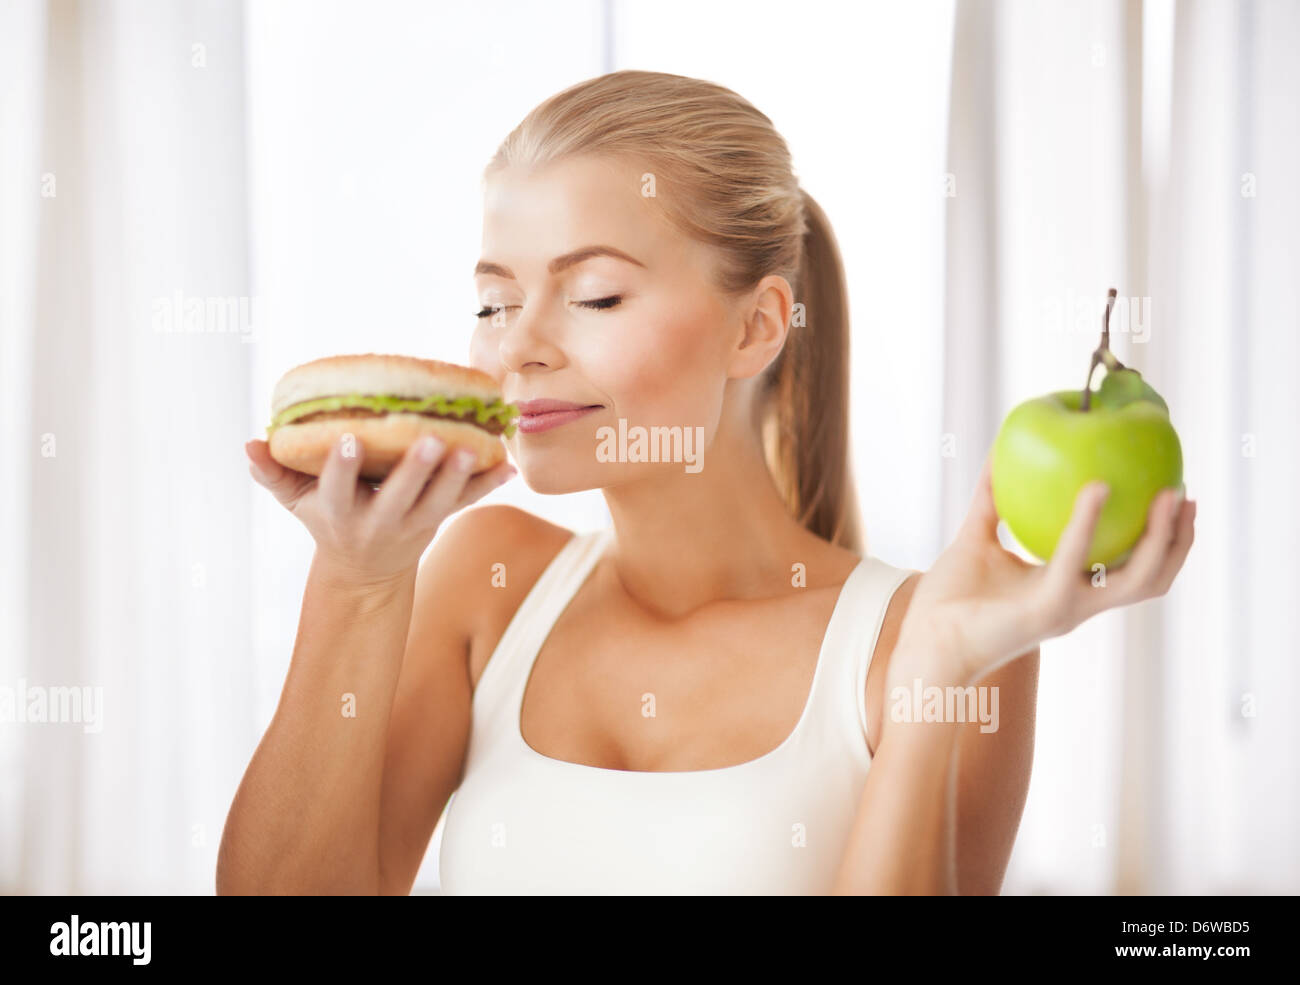 woman smelling hamburger and holding apple Stock Photo